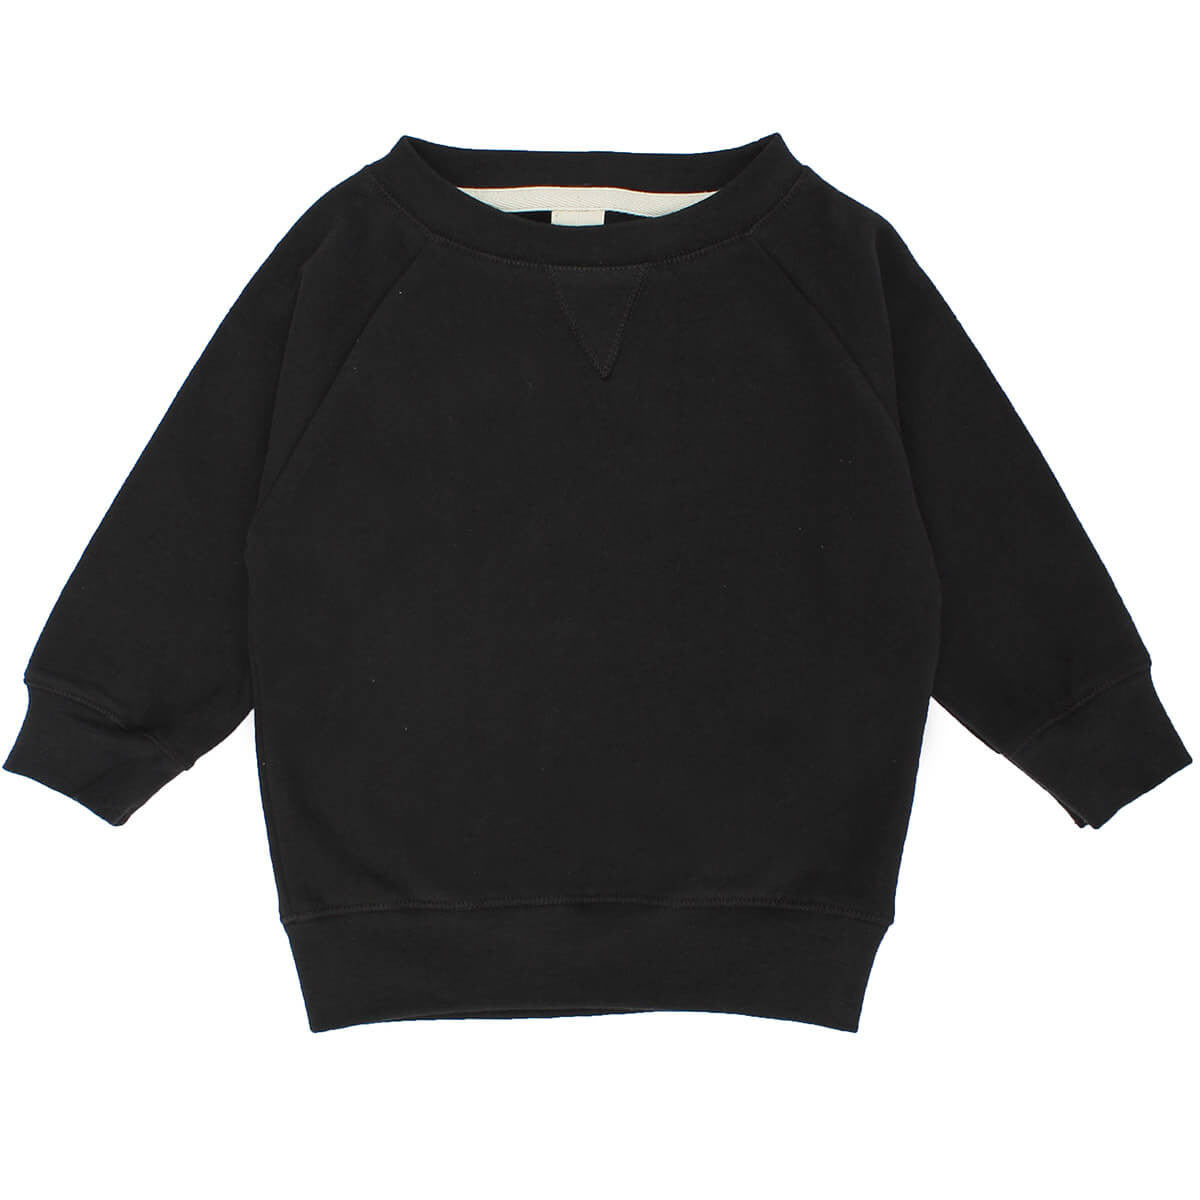 Crew Neck Sweater in Nearly Black by Gray Label – Junior Edition